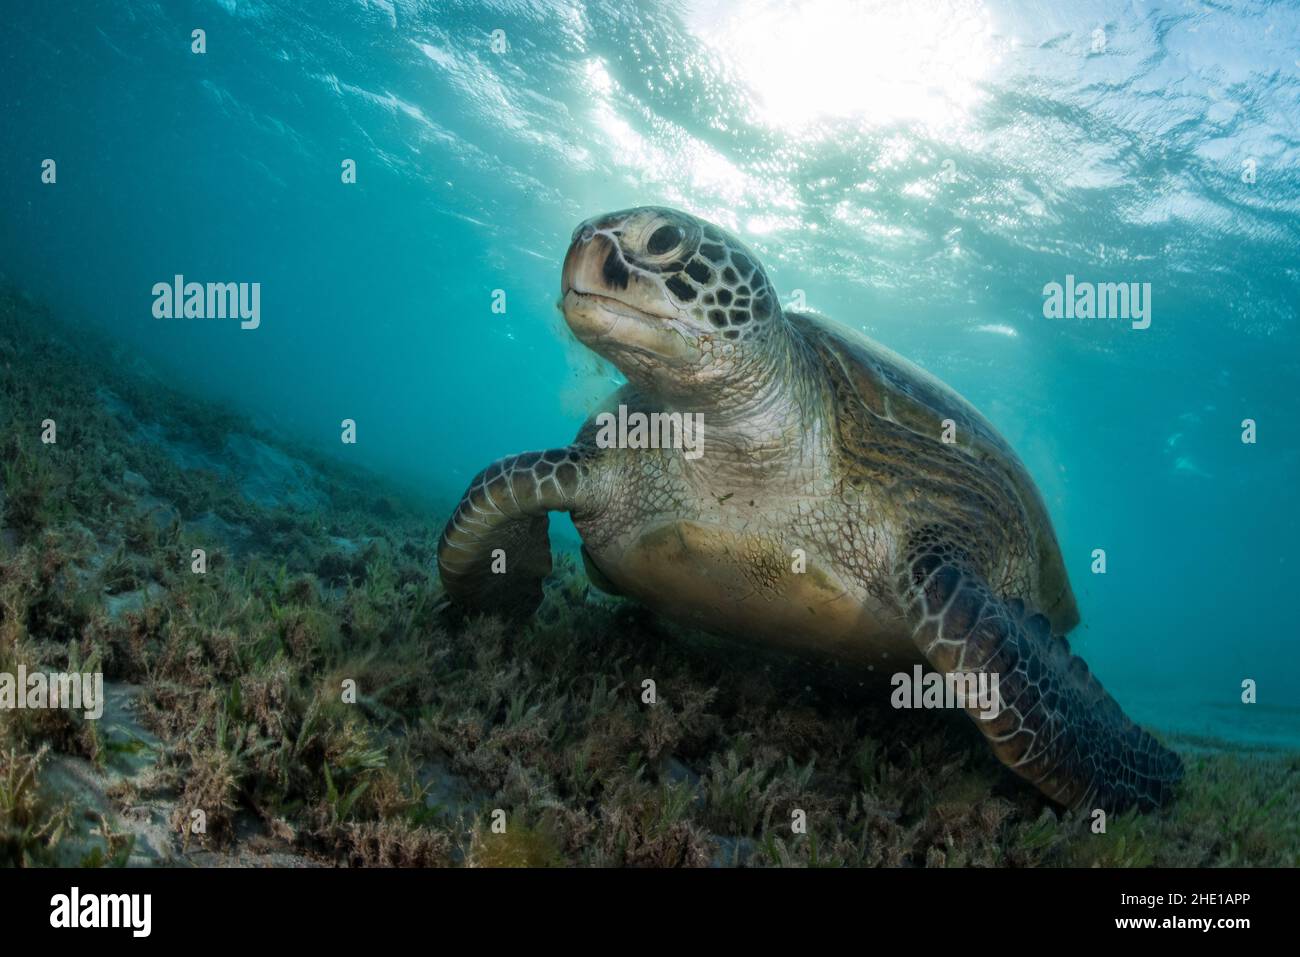 A green sea turtle (Chelonia mydas) an endangered species of reptile feeding on seagrass in the Red sea, Egypt. Stock Photo